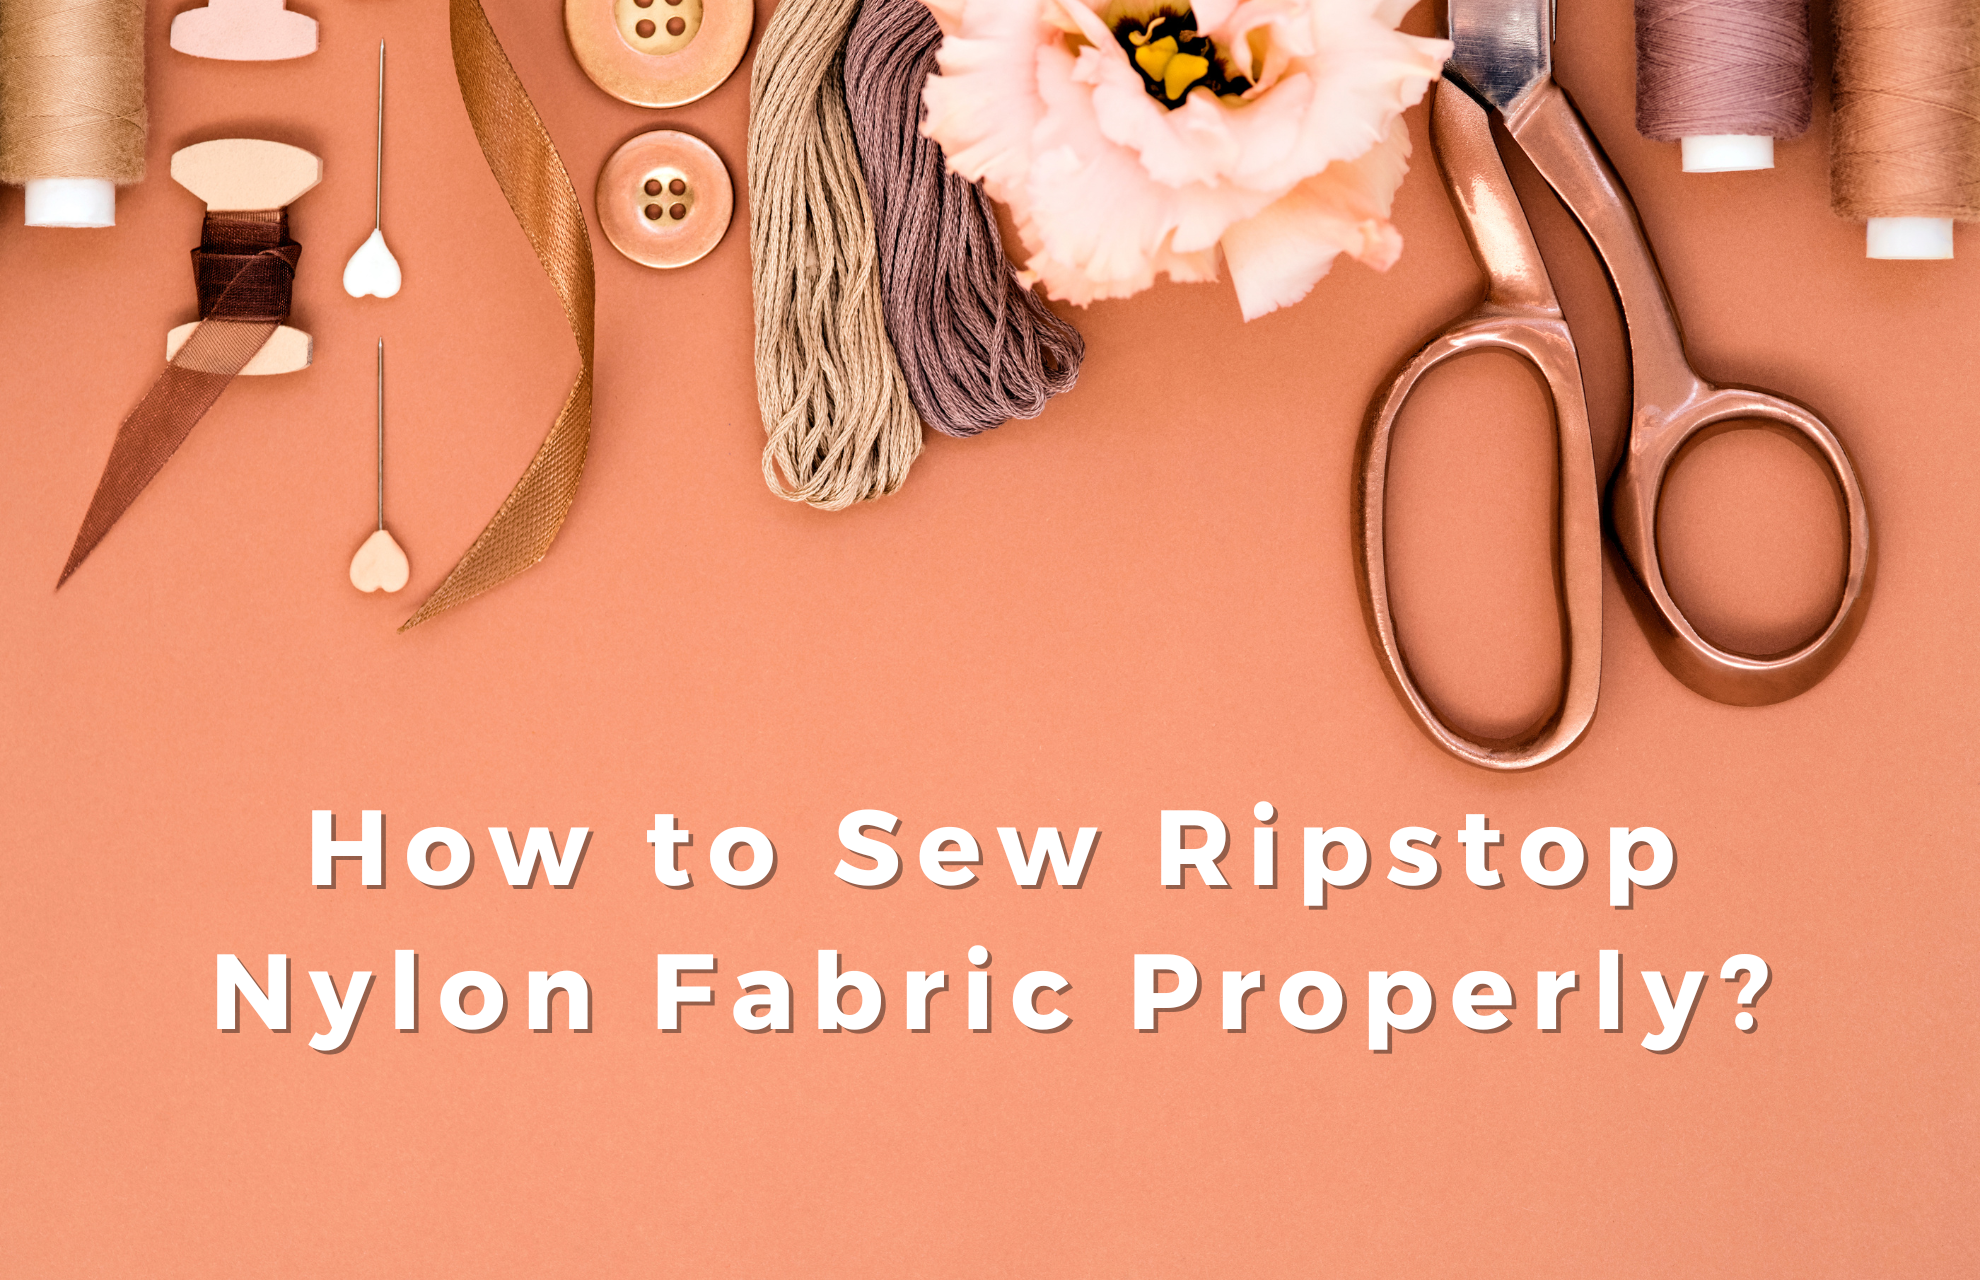 How to Sew Ripstop Nylon Fabric Properly? Tips & Tricks